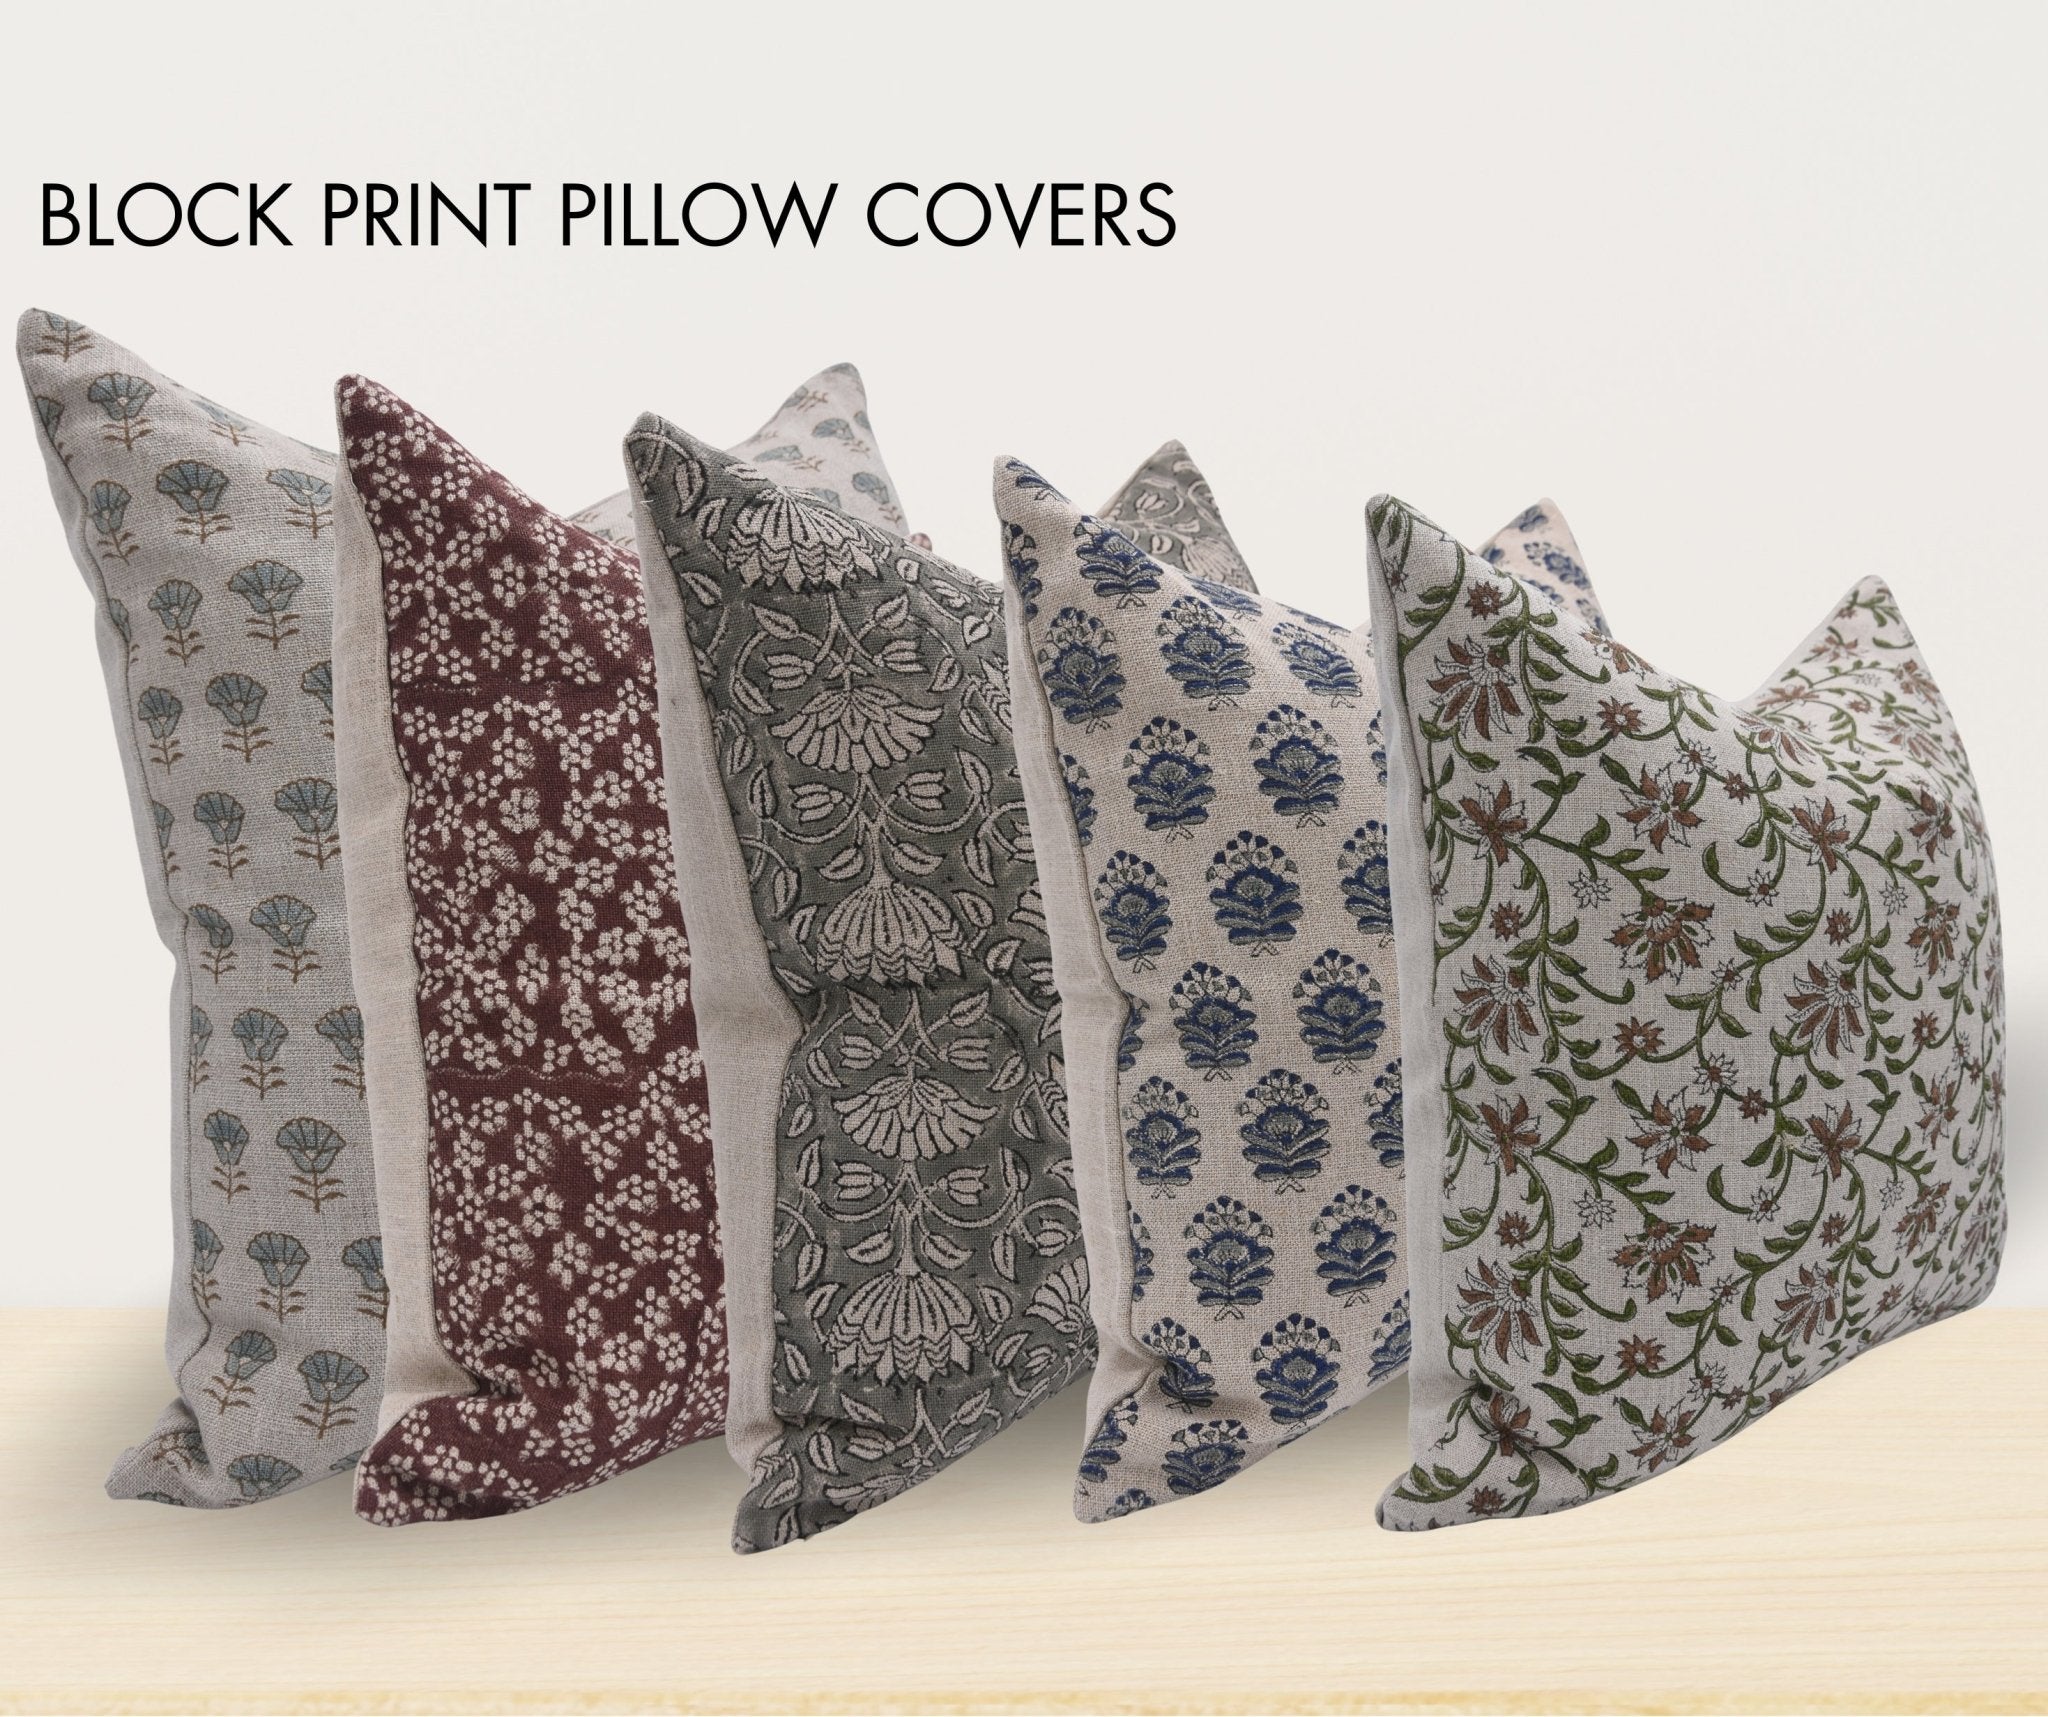 Block Print Pillow Cover Trends: Exploring the Latest Designs and Styles in Linen Fabric - FABDIVINE LLC